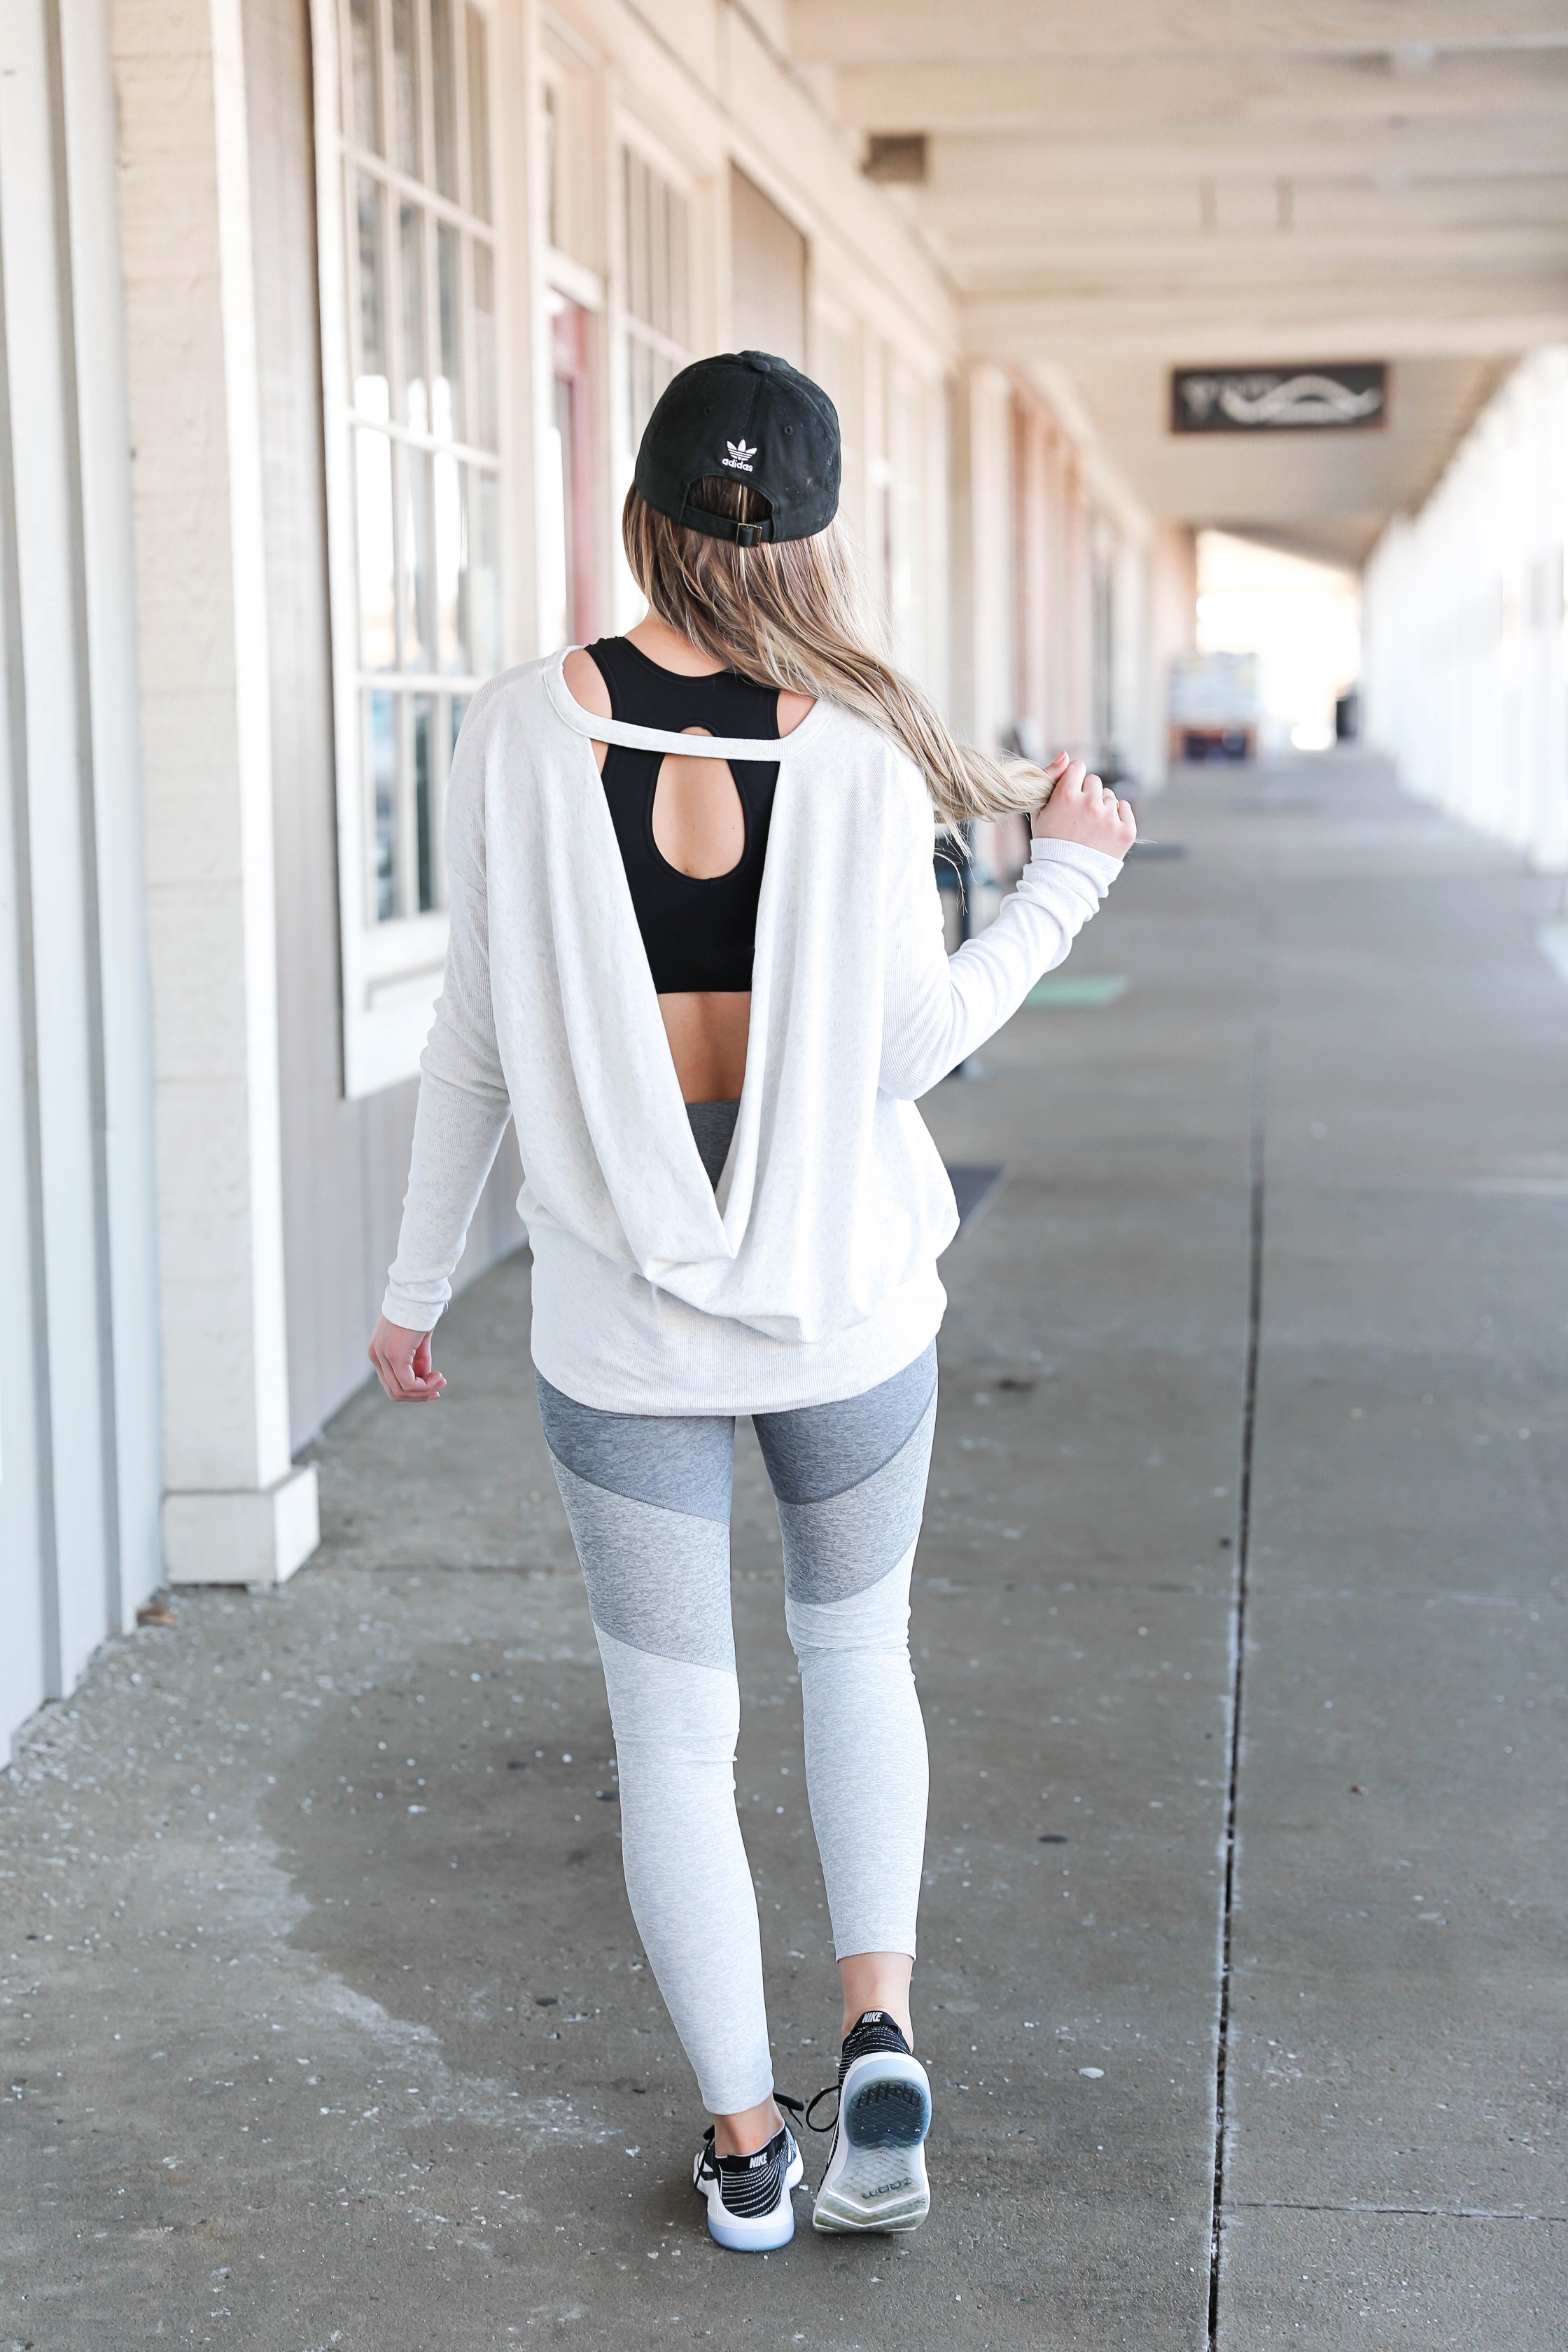 Cute New Year workout outfits for resolution inspiration in 2019! Stick to your fitness goals with a little outfit motivation! I love these color block leggings paired with the open back top and Adidas hat! Details on fashion blog daily dose of charm by lauren lindmark